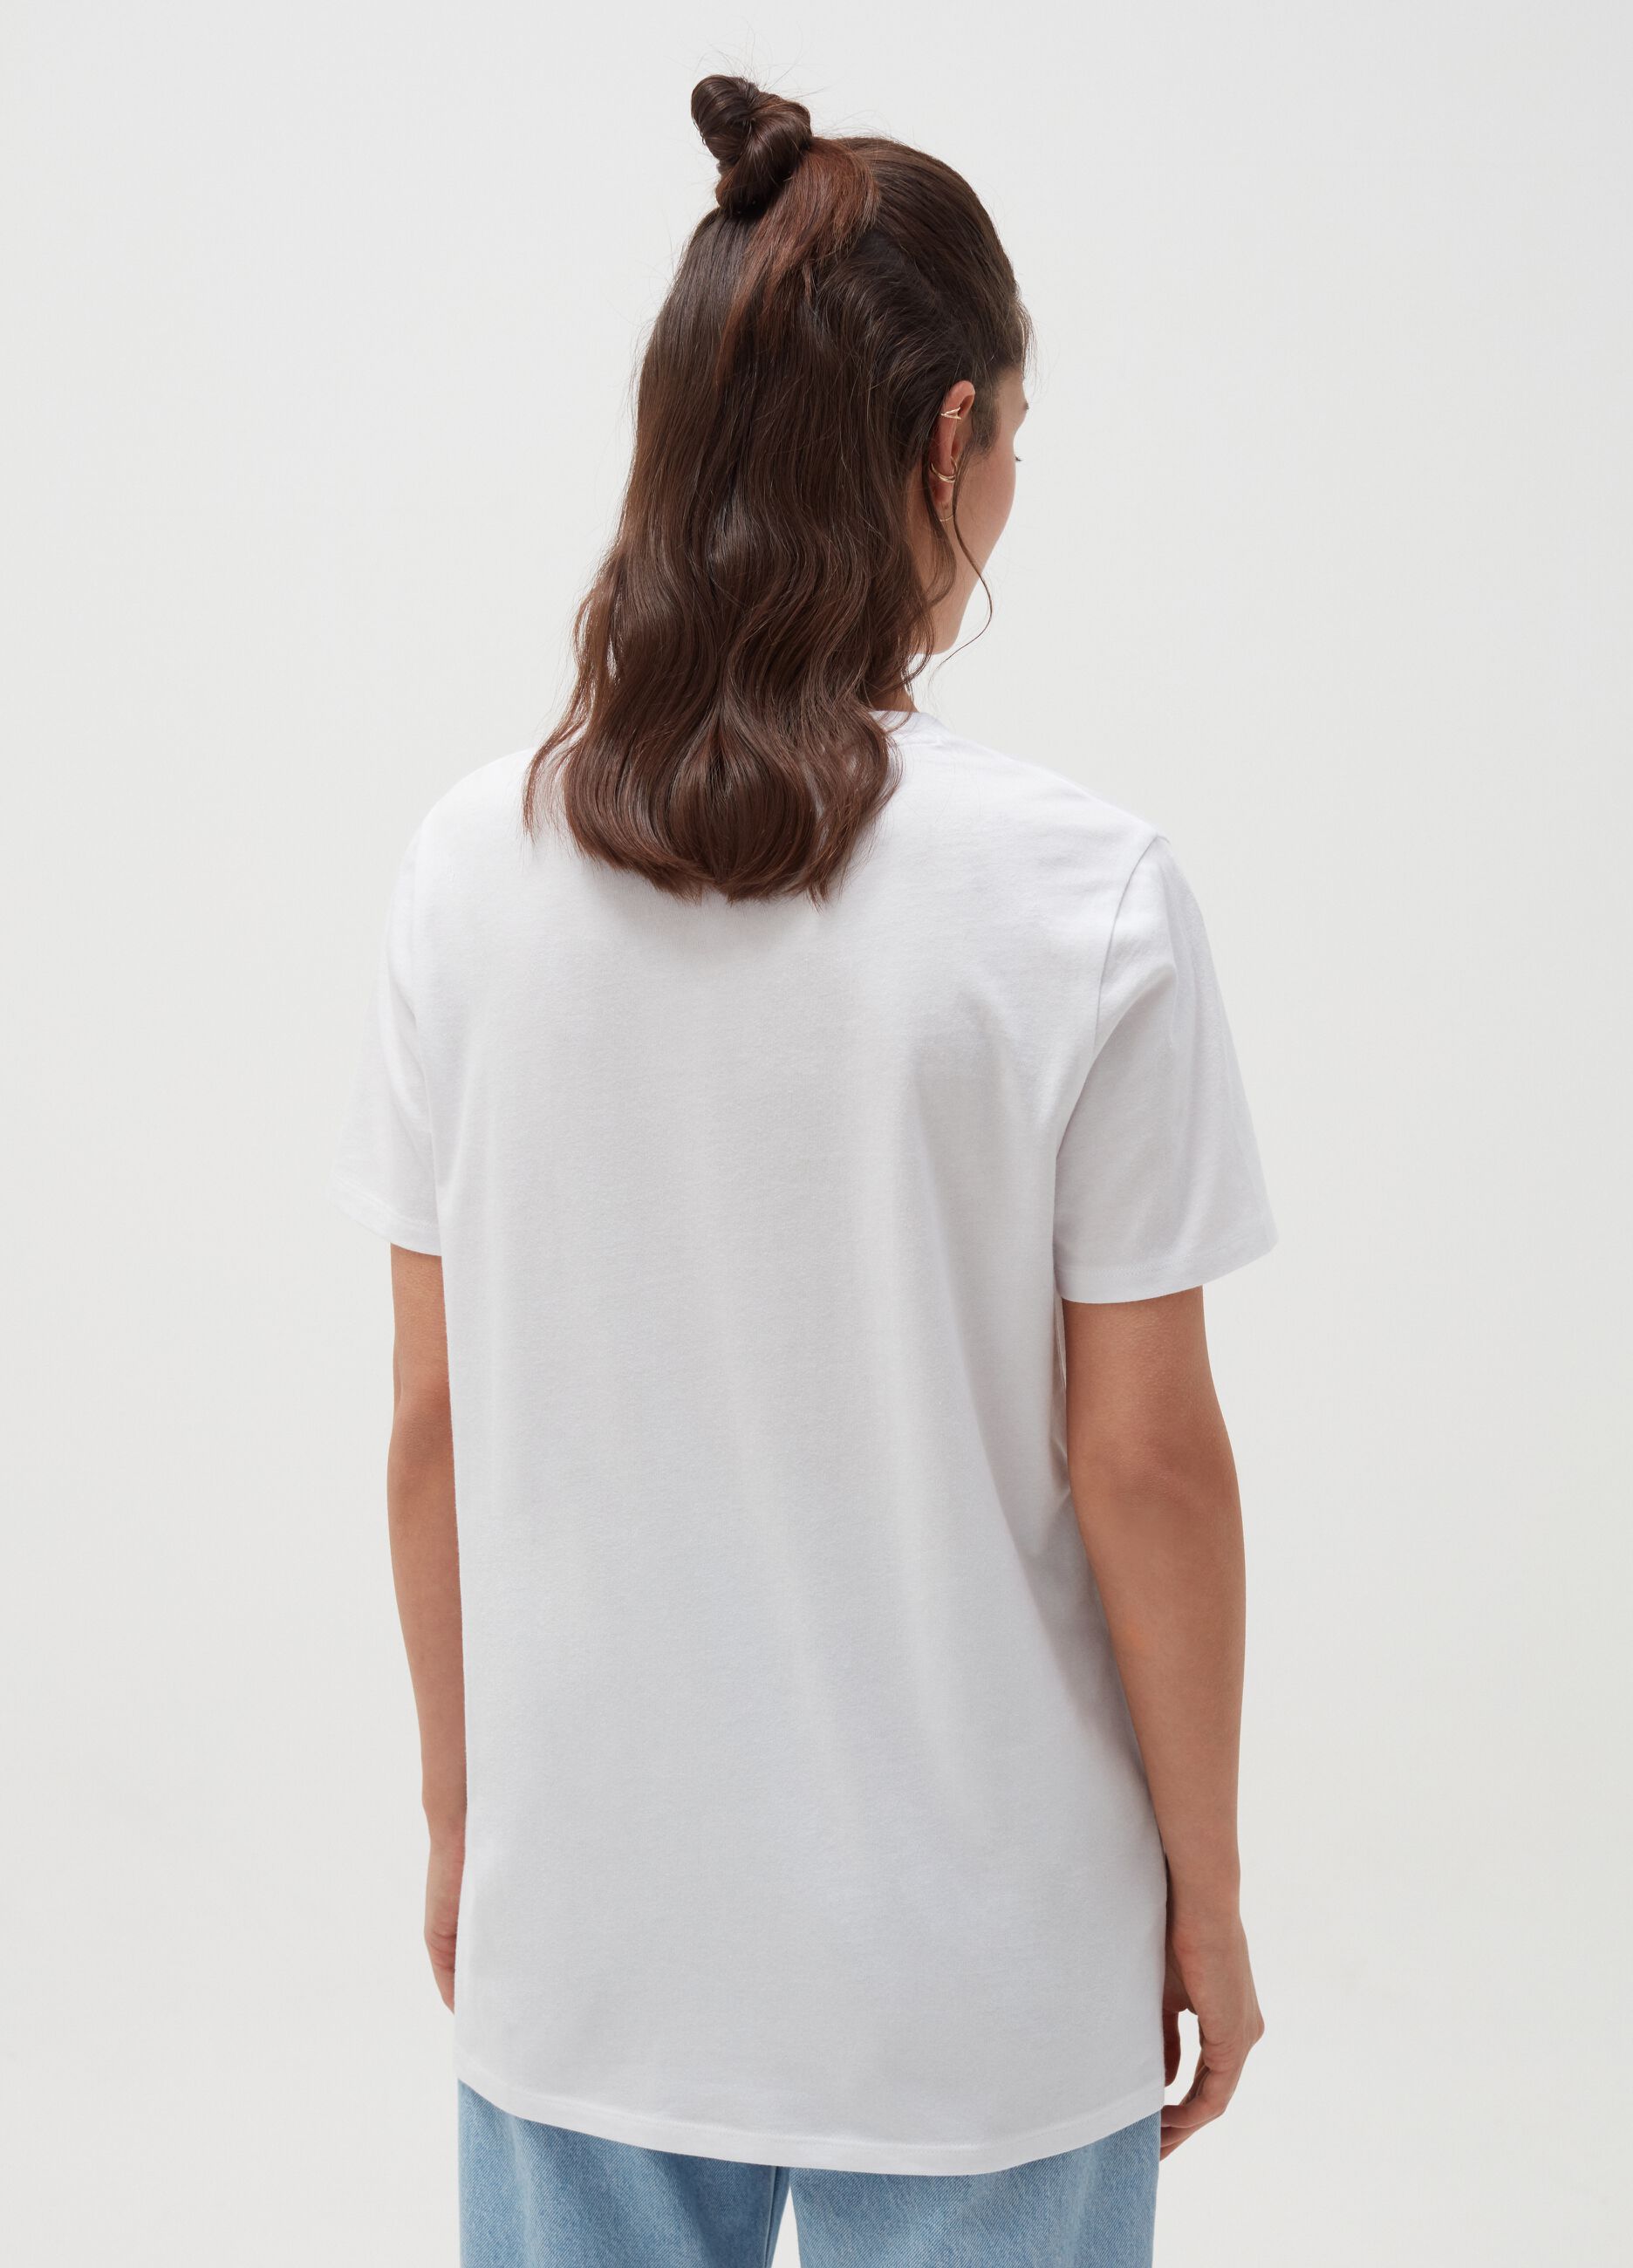 Maui and Sons oversize T-shirt in cotton